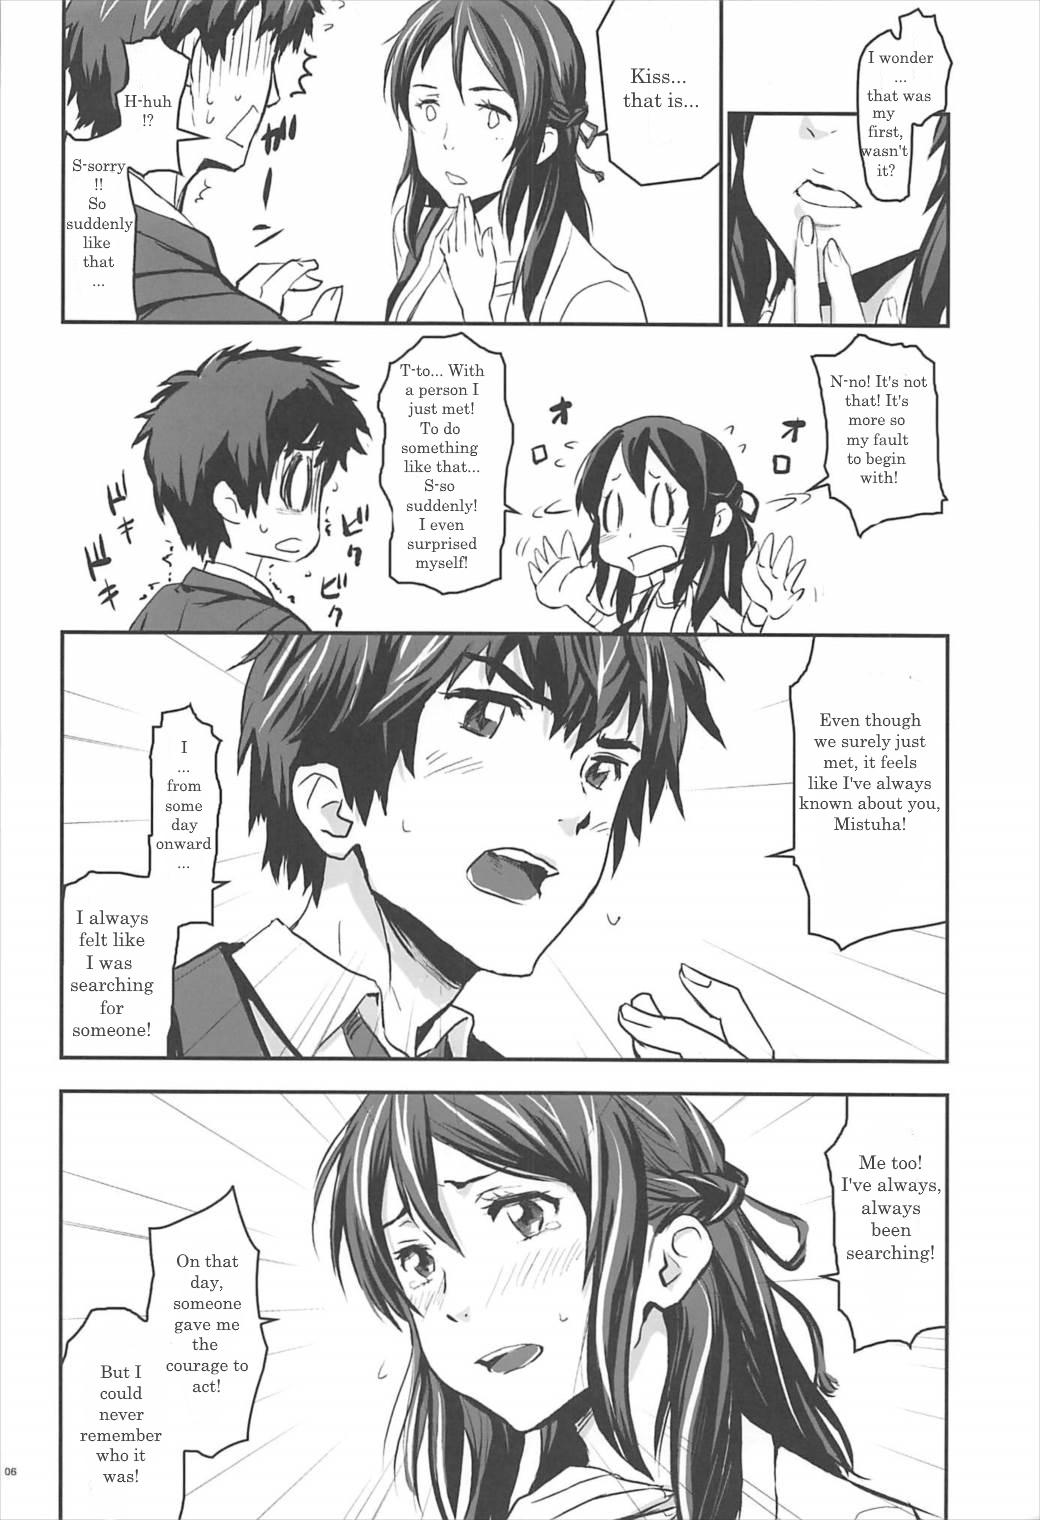 Amateur Blow Job Your Inside - Kimi no na wa. Relax - Page 5